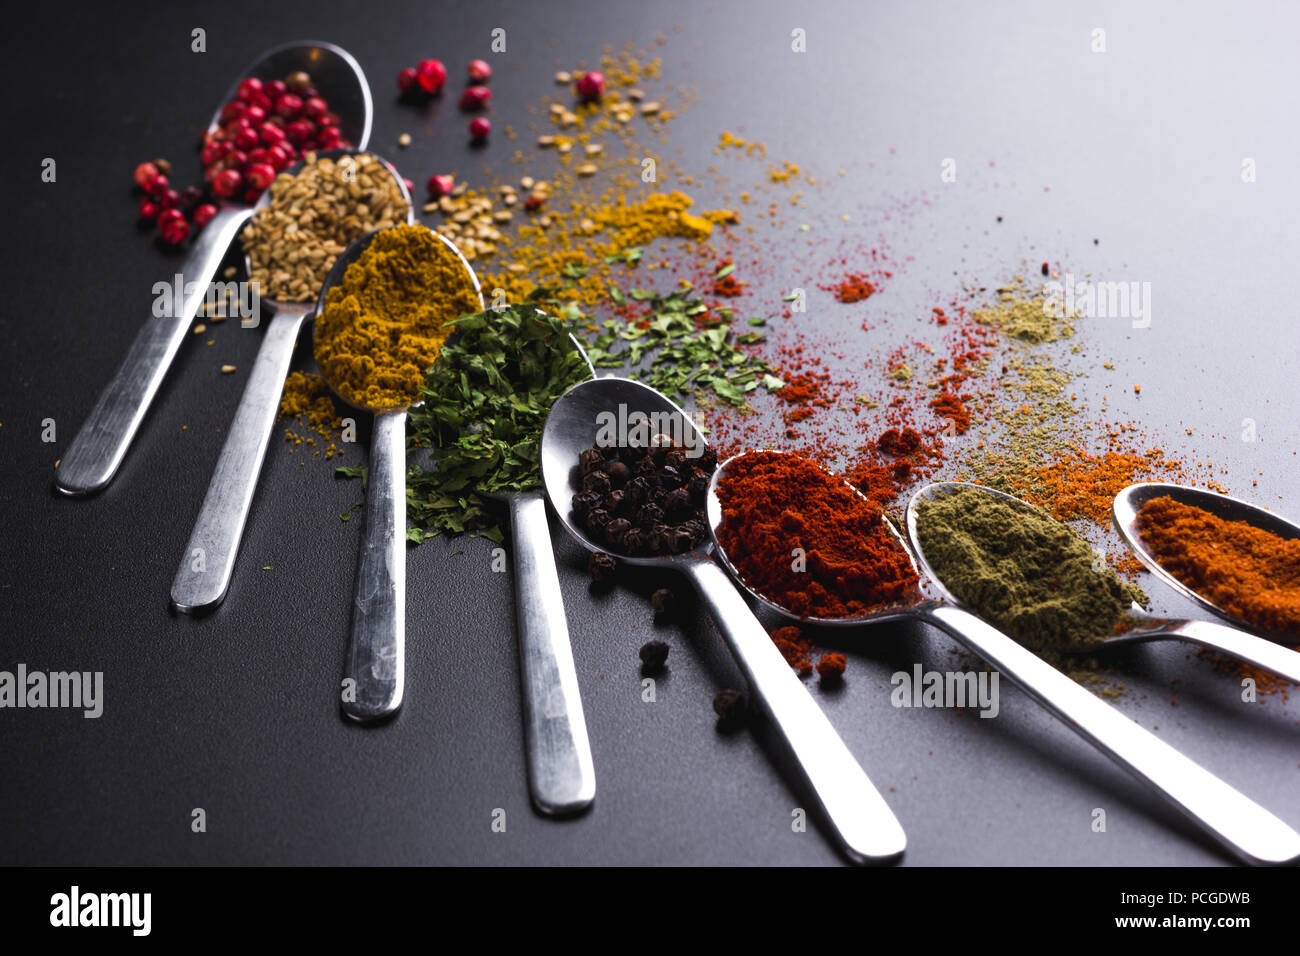 https://c8.alamy.com/comp/PCGDWB/composition-of-small-spoons-full-of-spices-and-condiments-for-cooking-on-a-black-background-PCGDWB.jpg